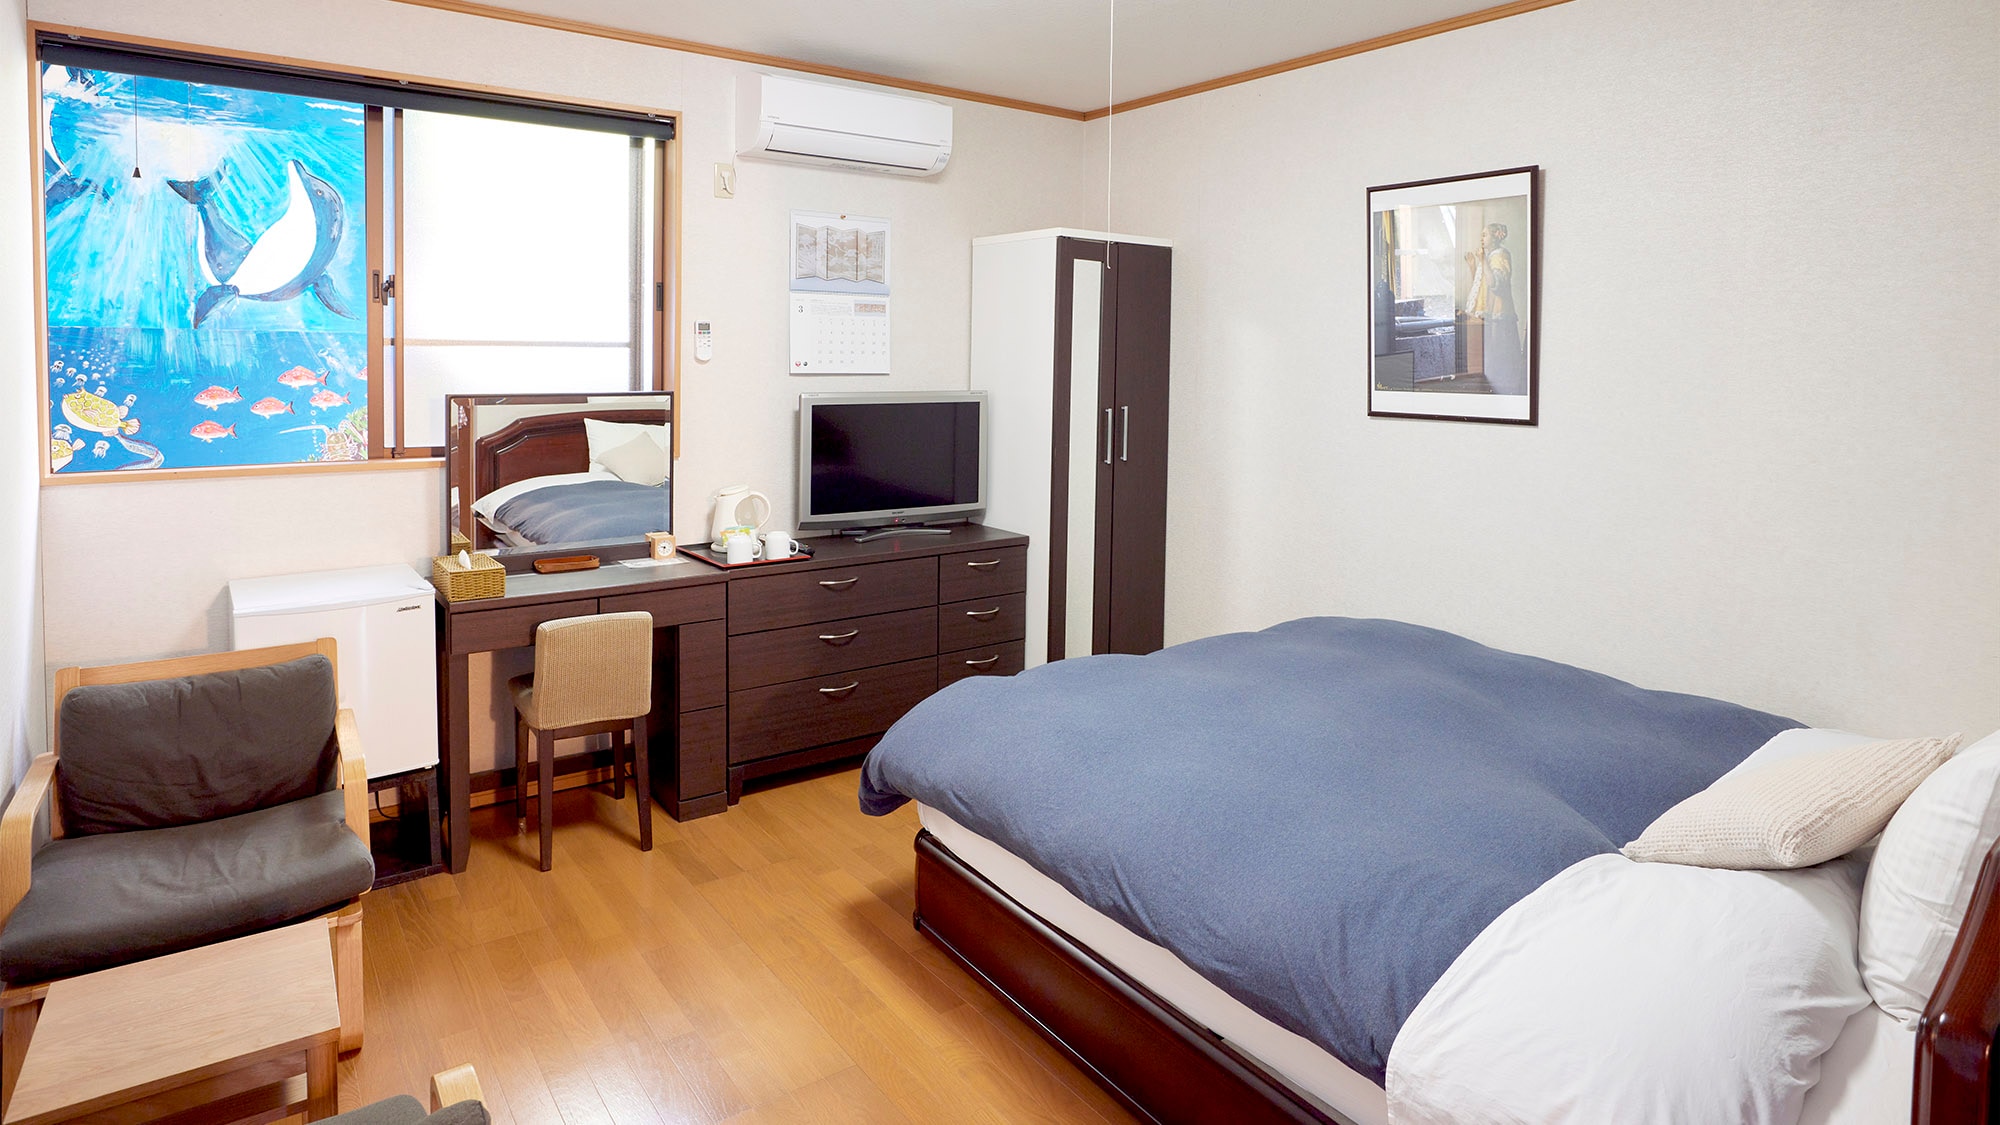 ・ There is also a Western-style room with a double bed.